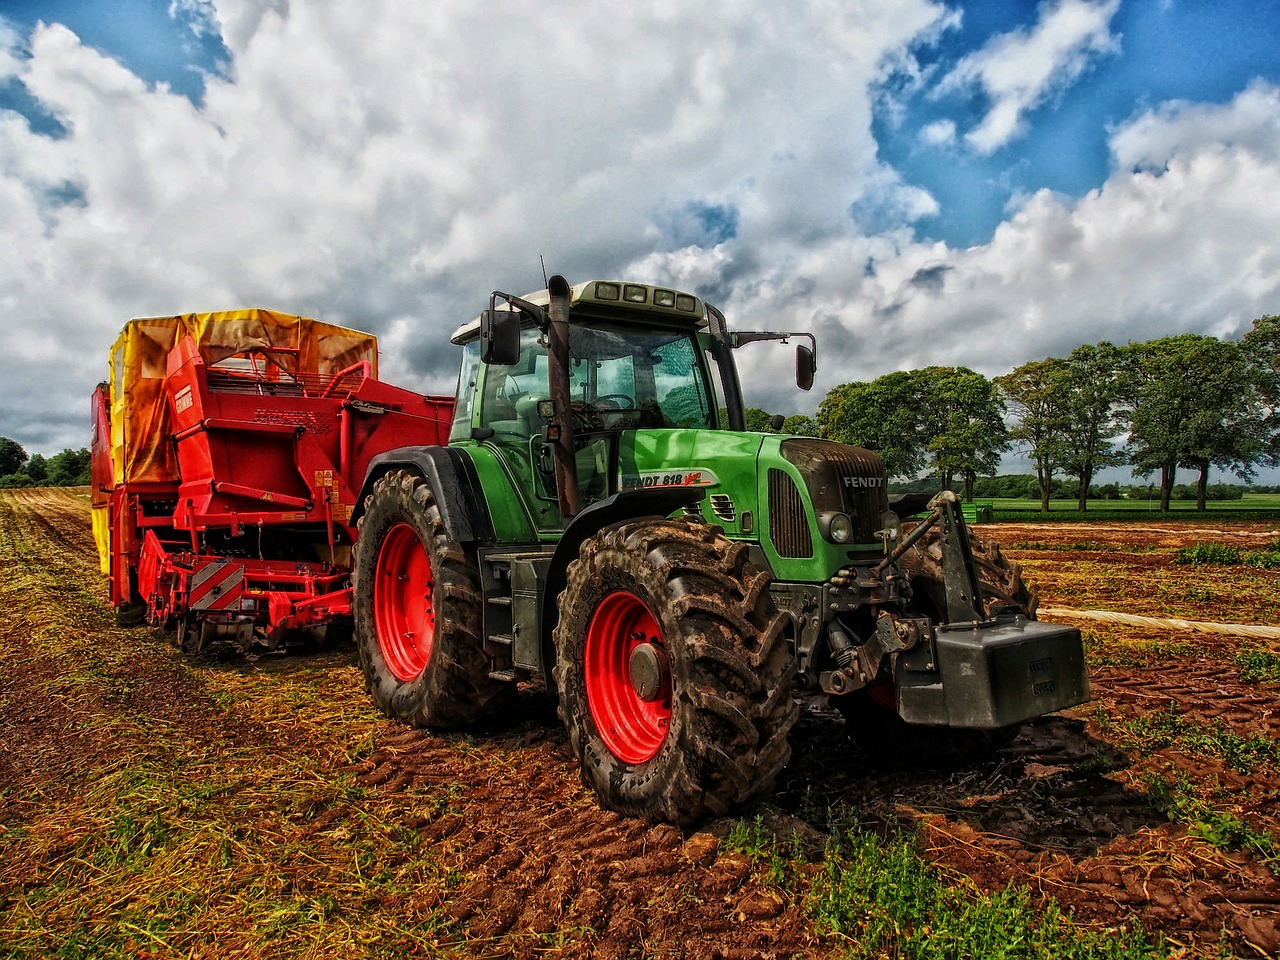 Contactless reading and recording of sensor data on agricultural vehicles